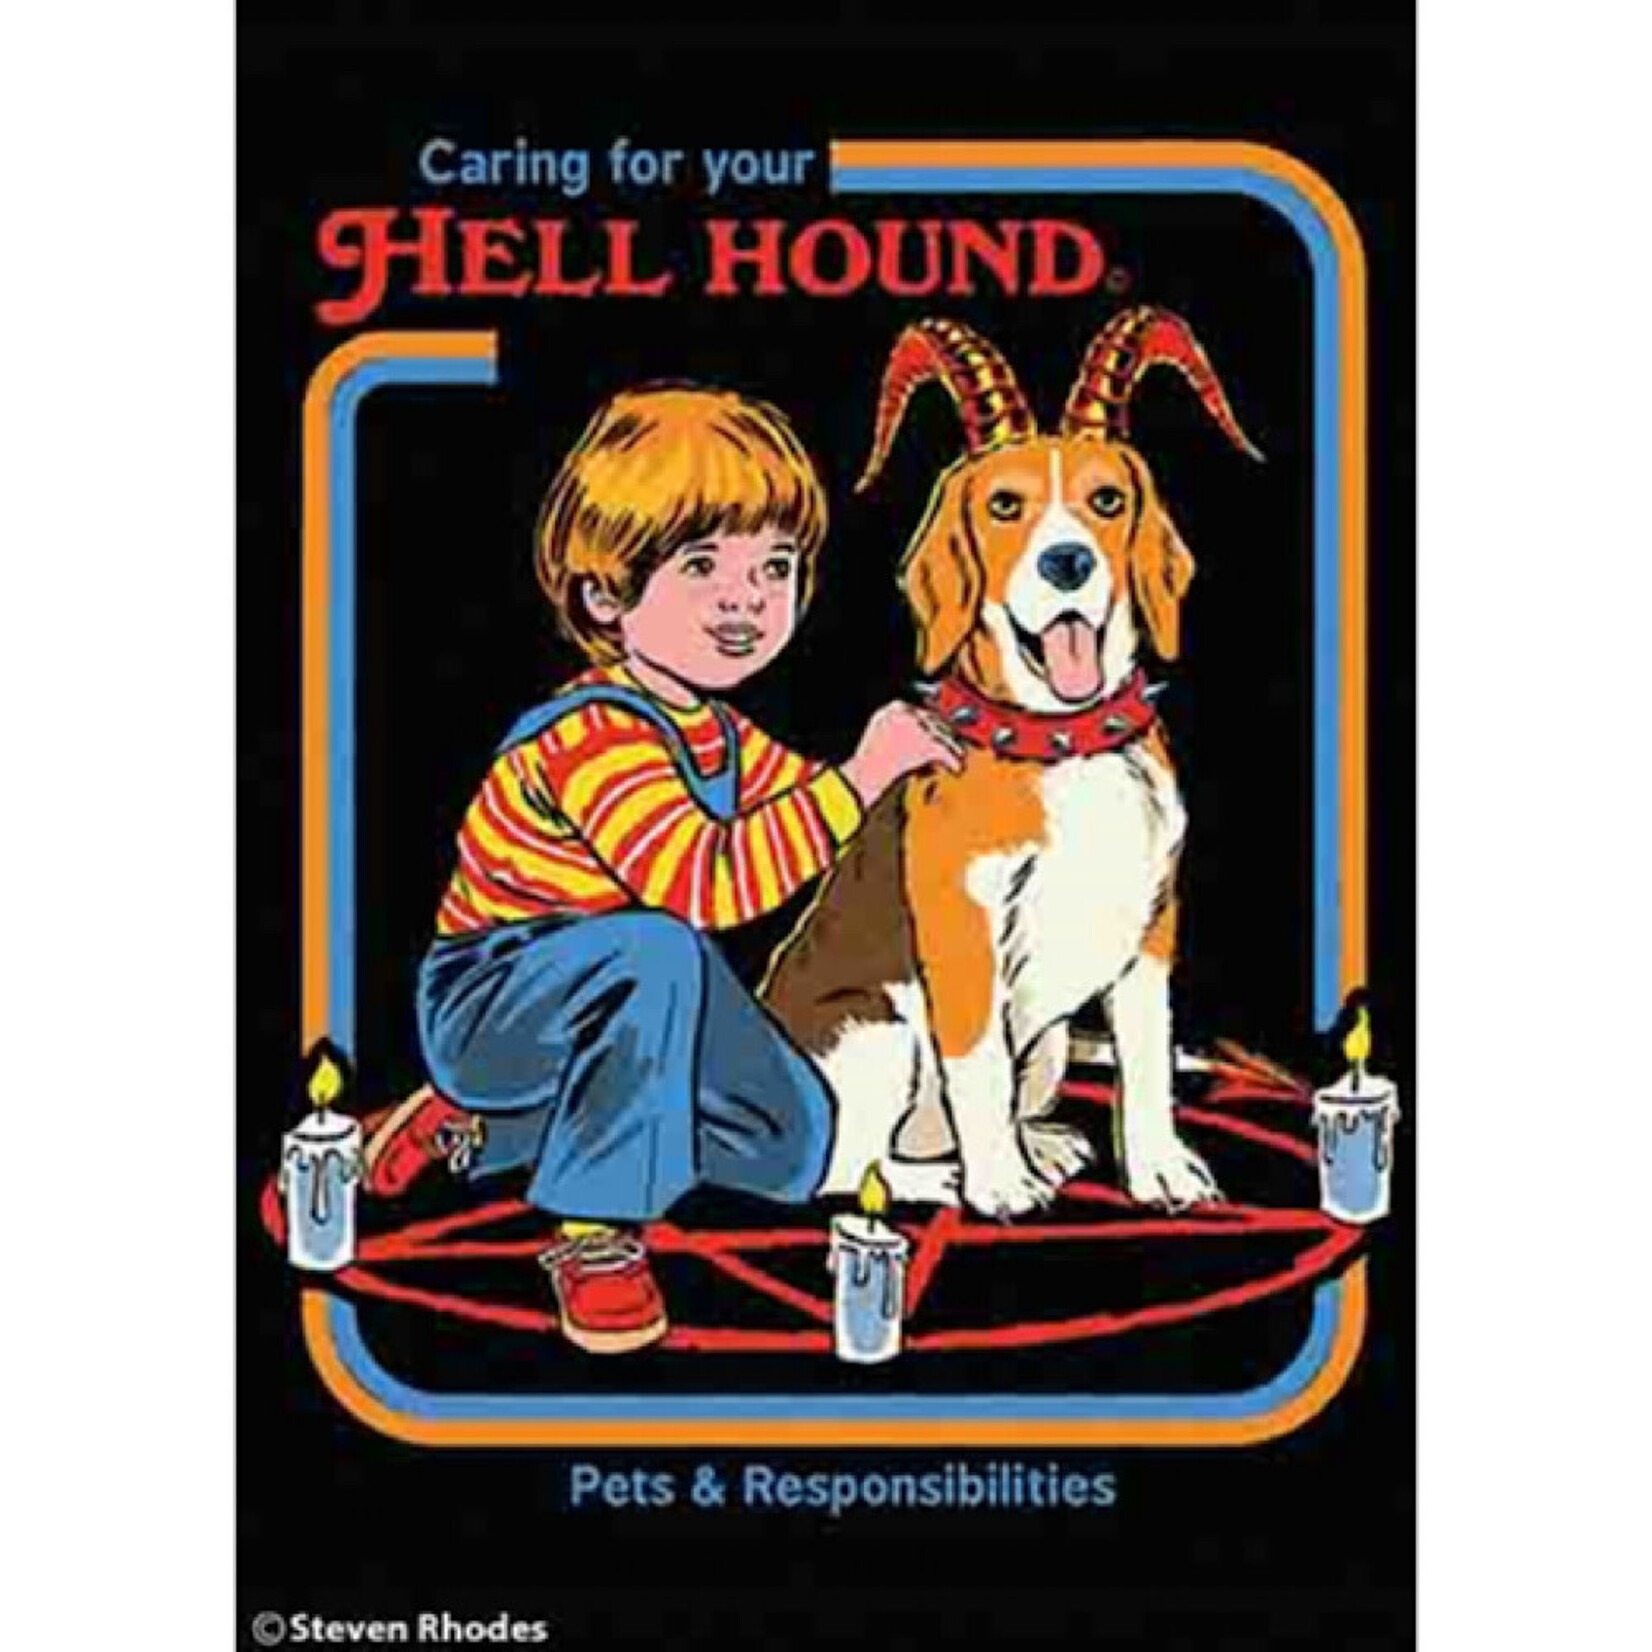 Magnet - Caring for you Hell Hound pets and responsibilities (Dog) (Steve Rhodes)